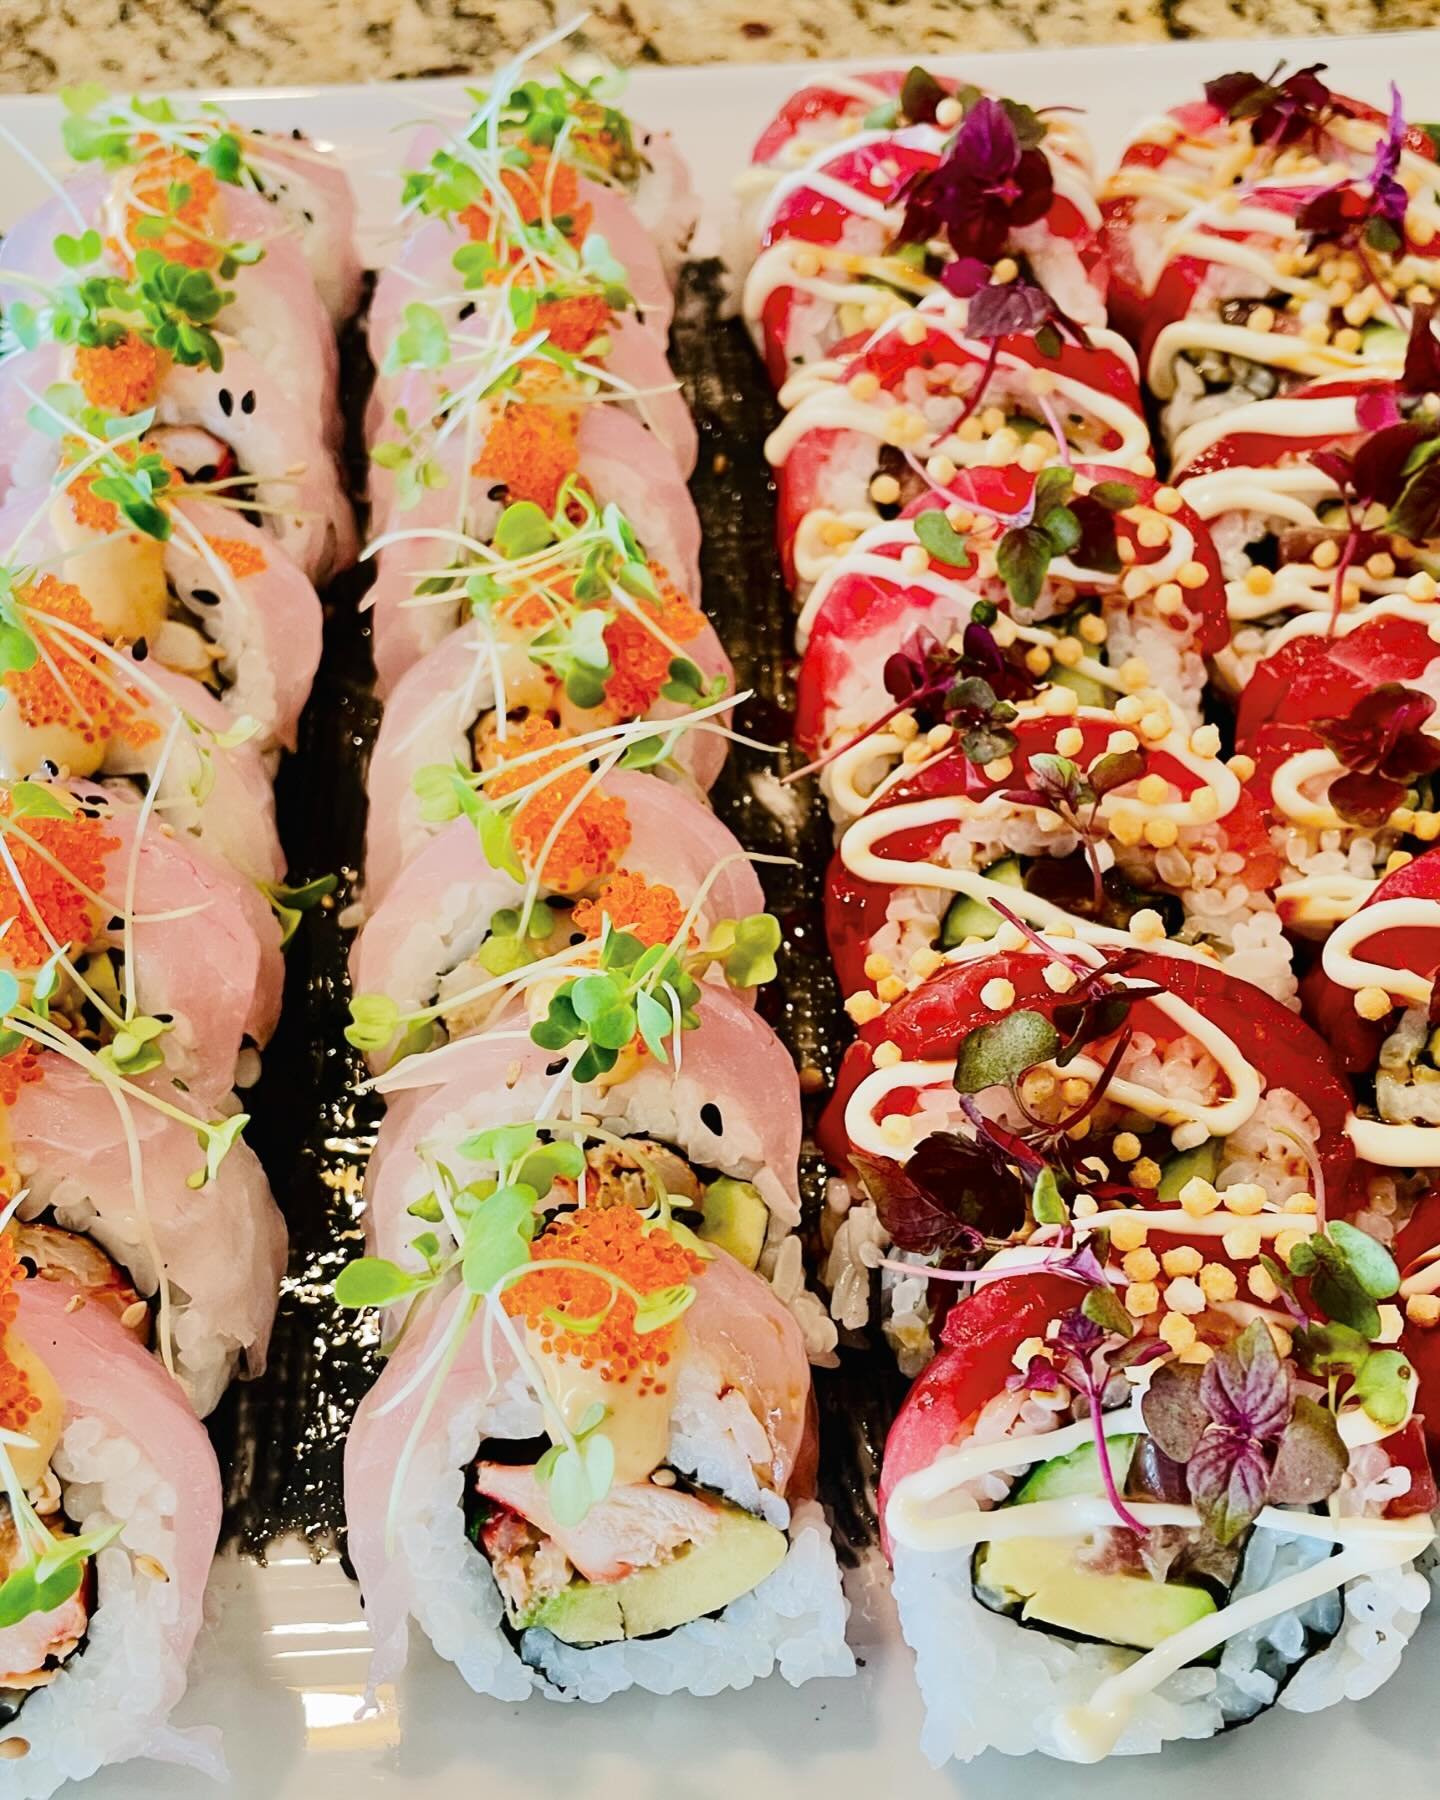 Sushi is hands down my favorite to eat and create! Some of my creations to eat through your eyes enjoy.
#sushi #sushilovers #creativity #foodstagram #mauiprivatechef  #hawaii #eatclean  #eatlocal